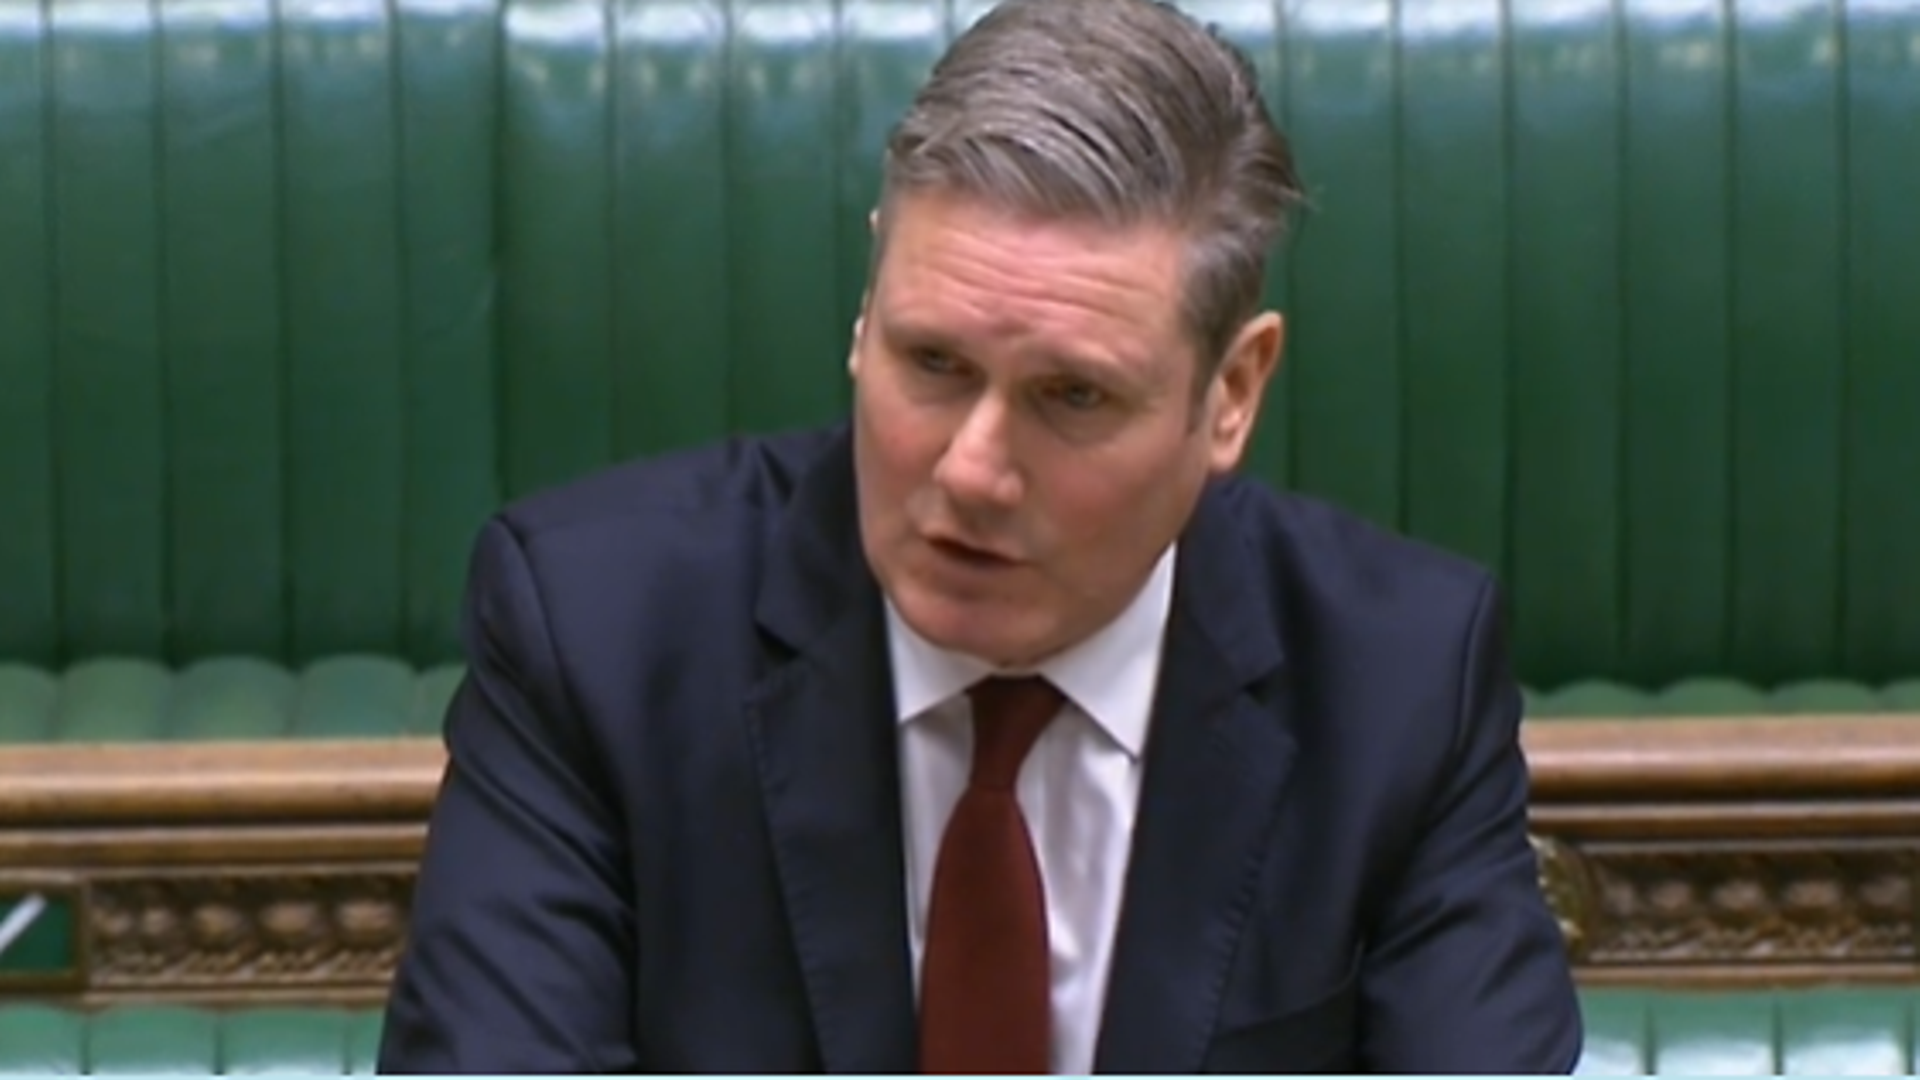 Keir Starmer in the House of Commons - Credit: Parliament Live